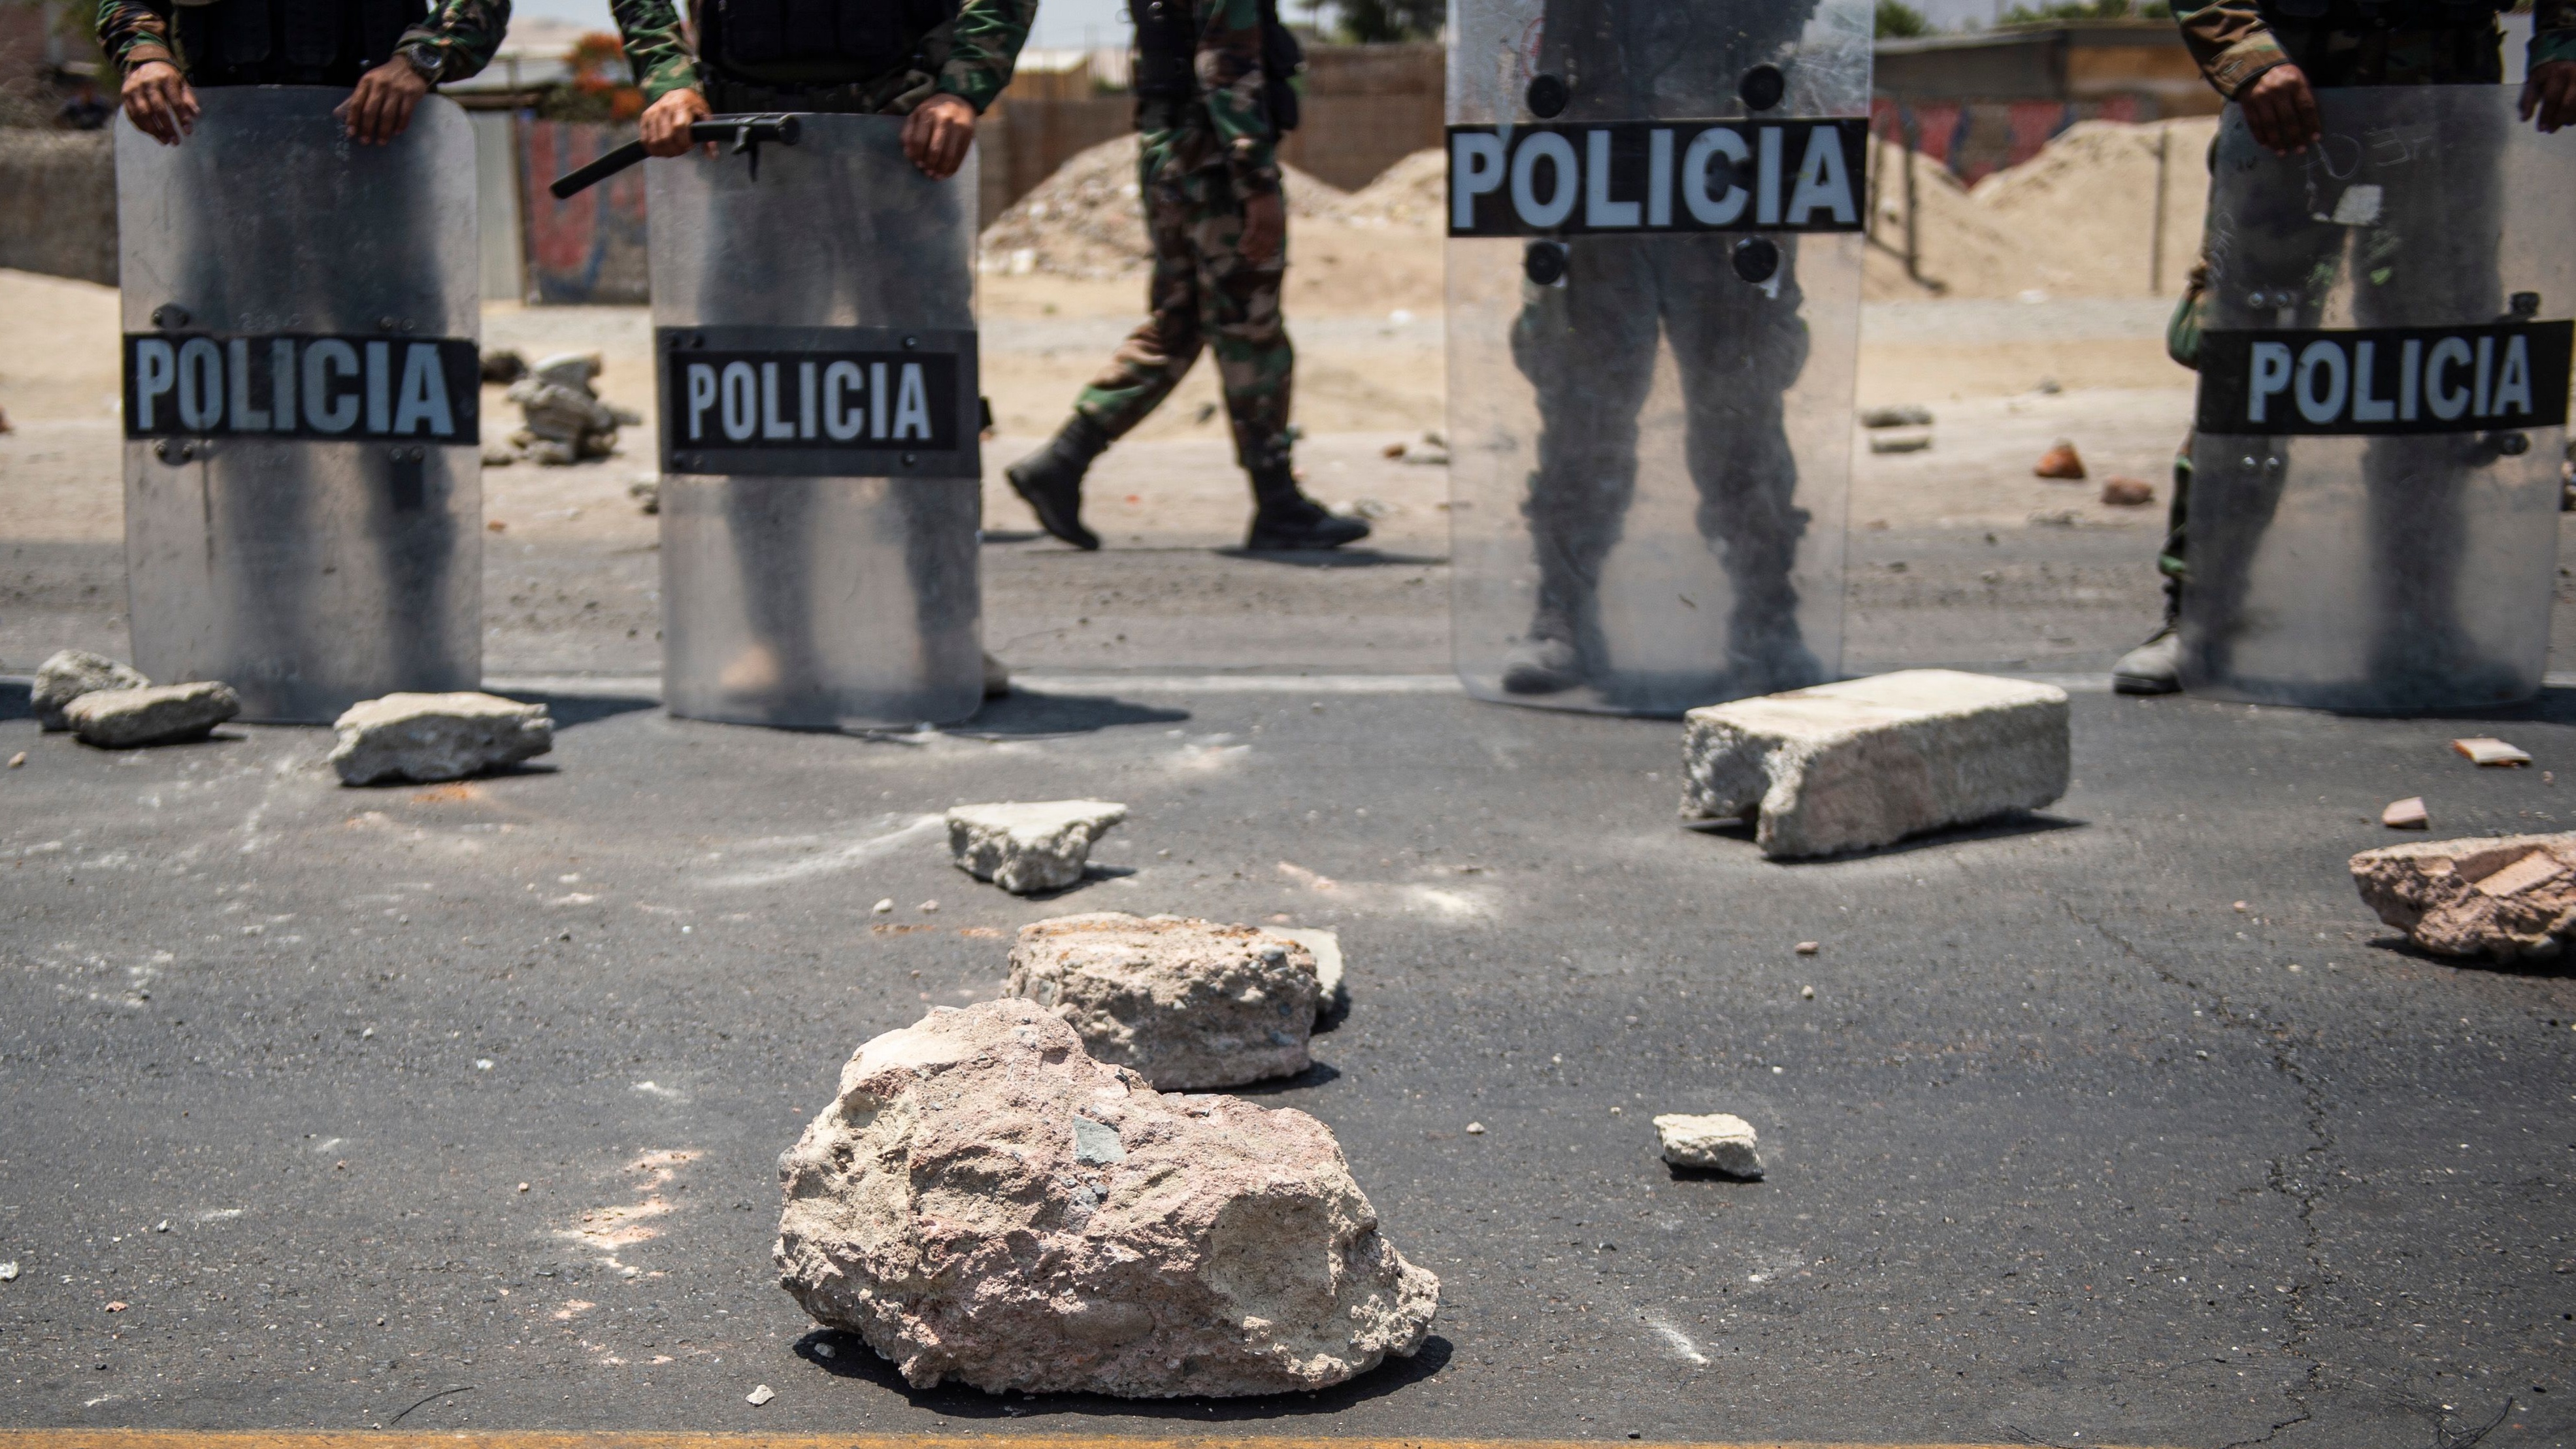 Rocks thrown at police during a peasants protest demanding a higher salary in Ica, Peru.